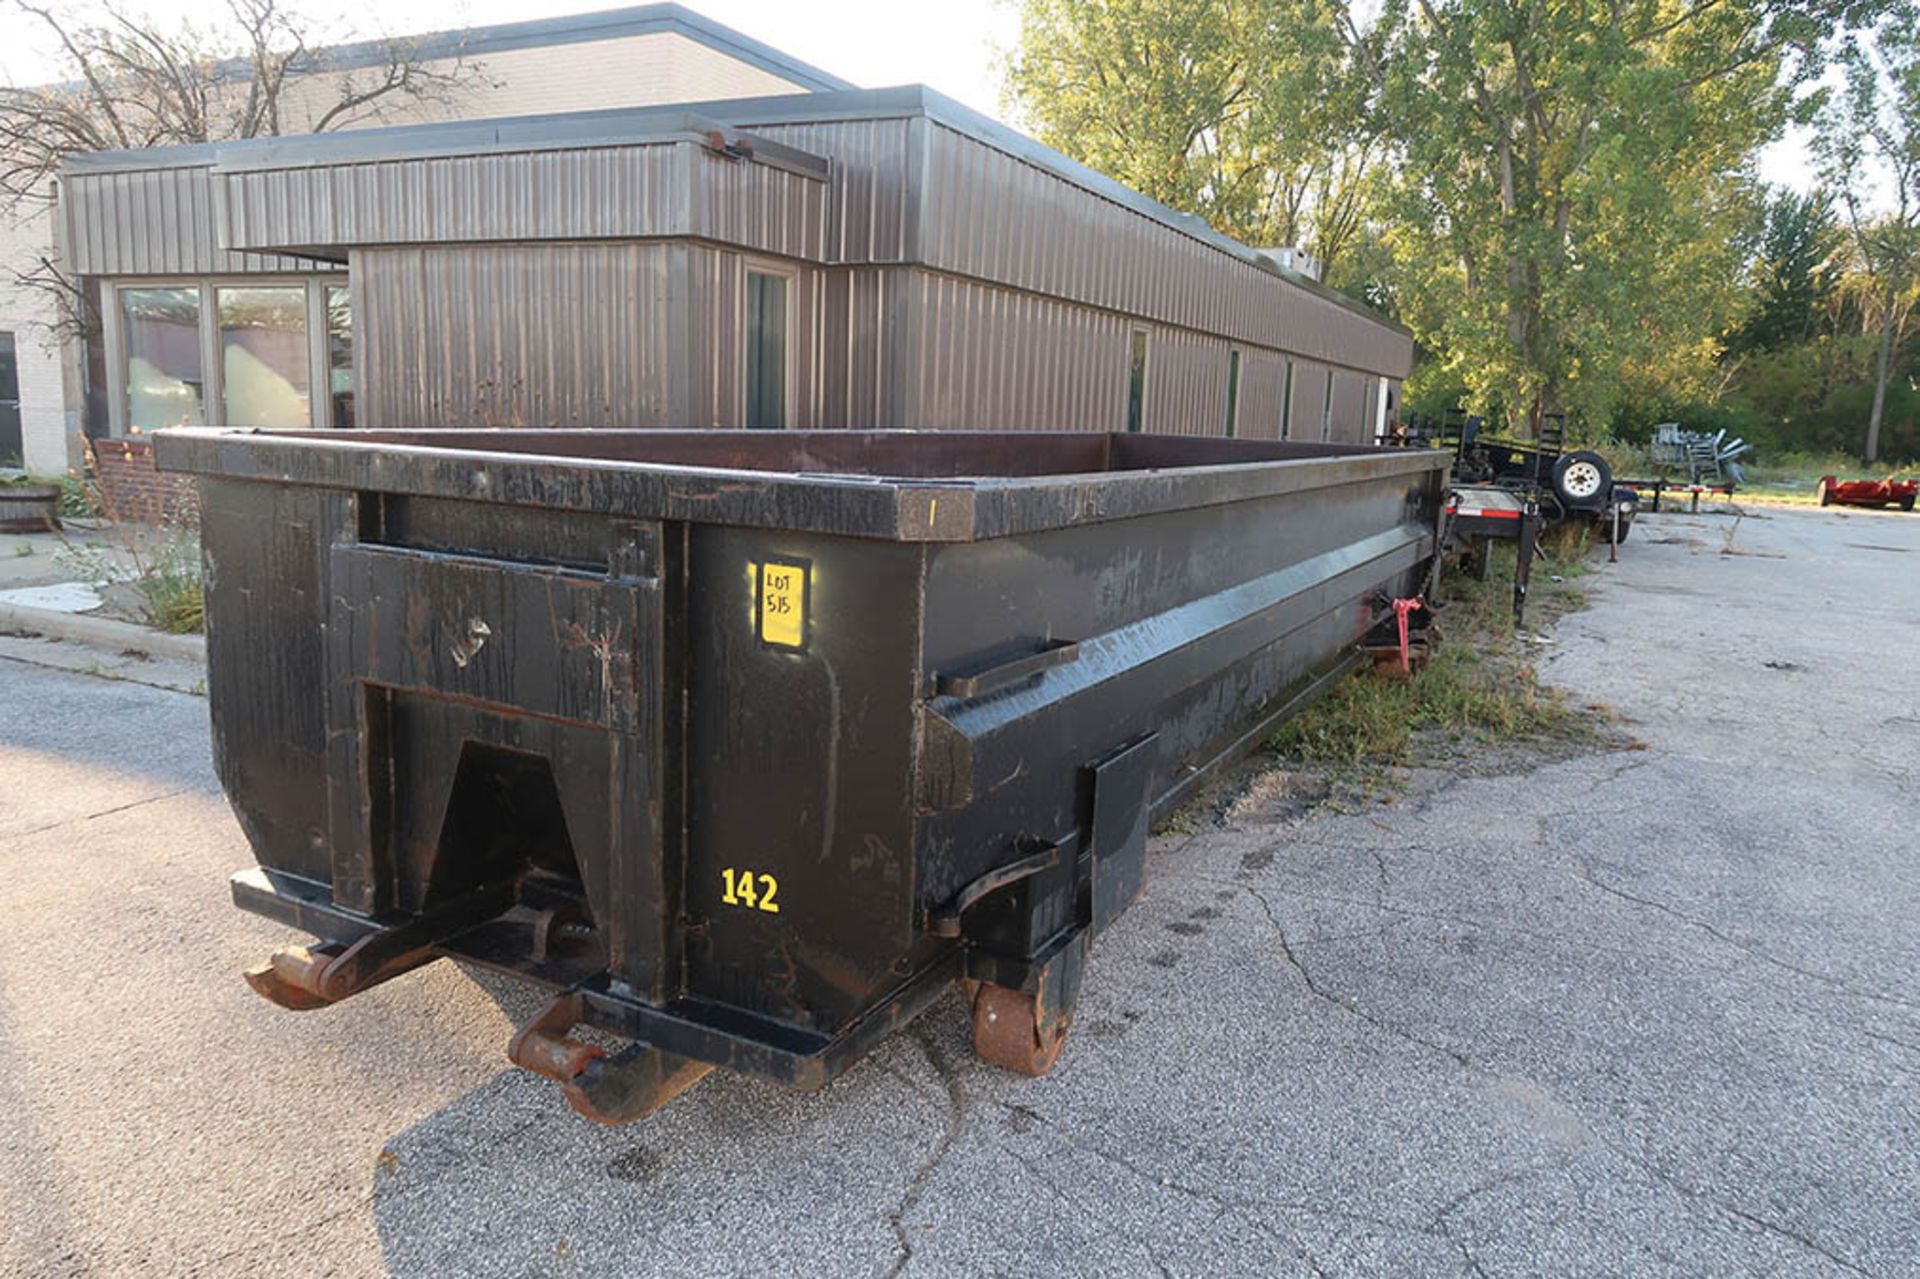 30 CU. YARD ROLL-OFF CONTAINER, RB142 ***LOCATED IN MIDLAND, MICHIGAN**